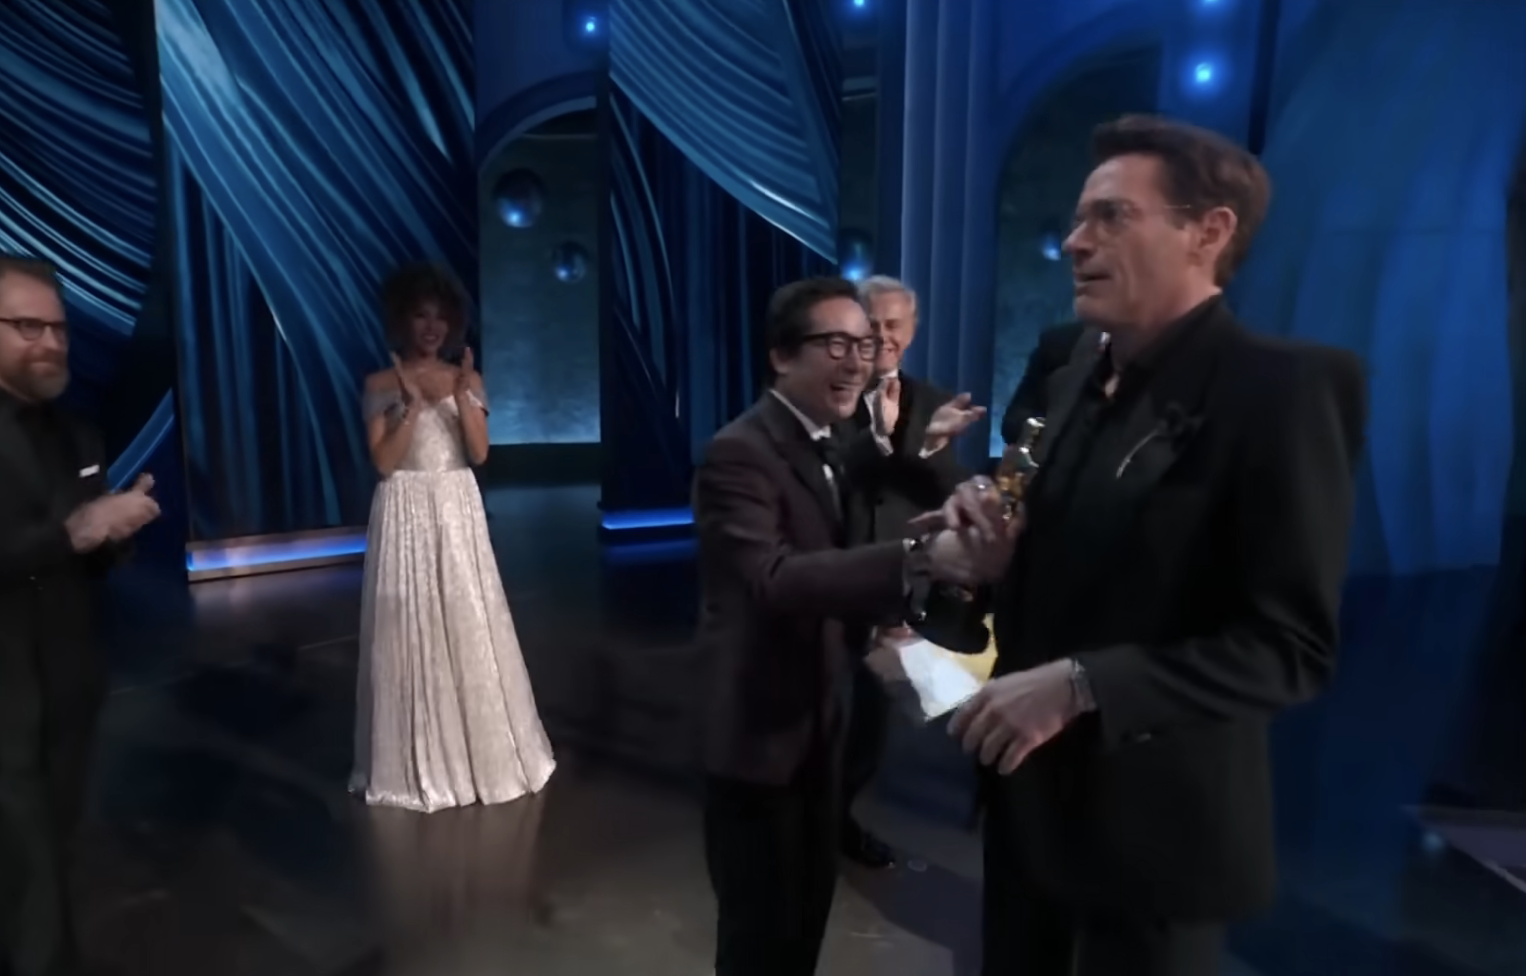 RDJ receives an award onstage from Ke Huy while the others applaud